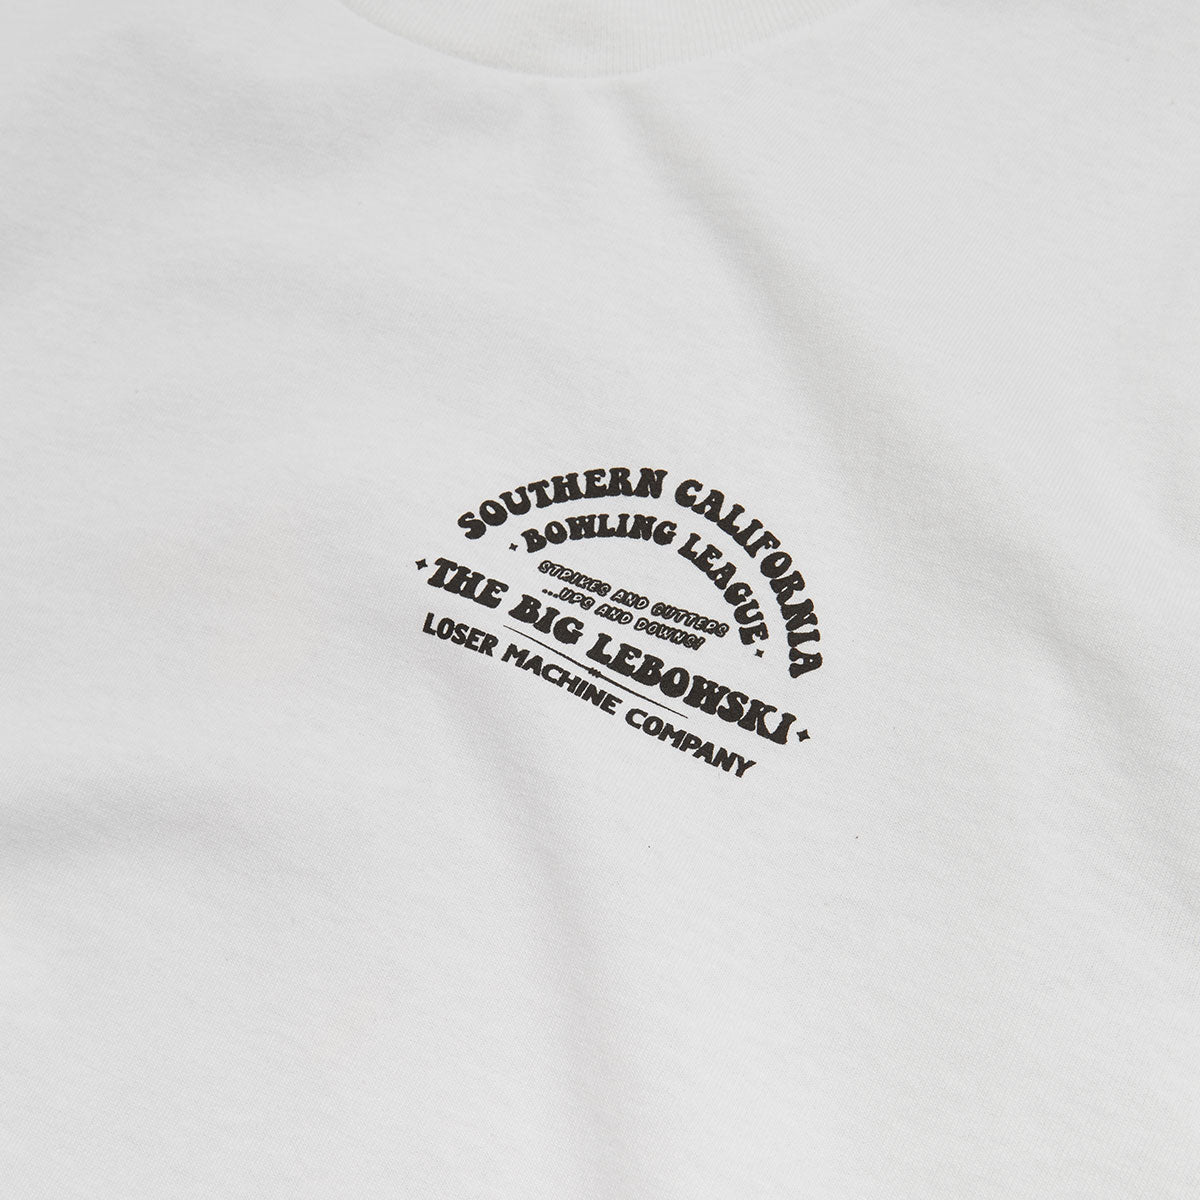 Loser Machine Over The Line Long Sleeve T-Shirt - White image 4